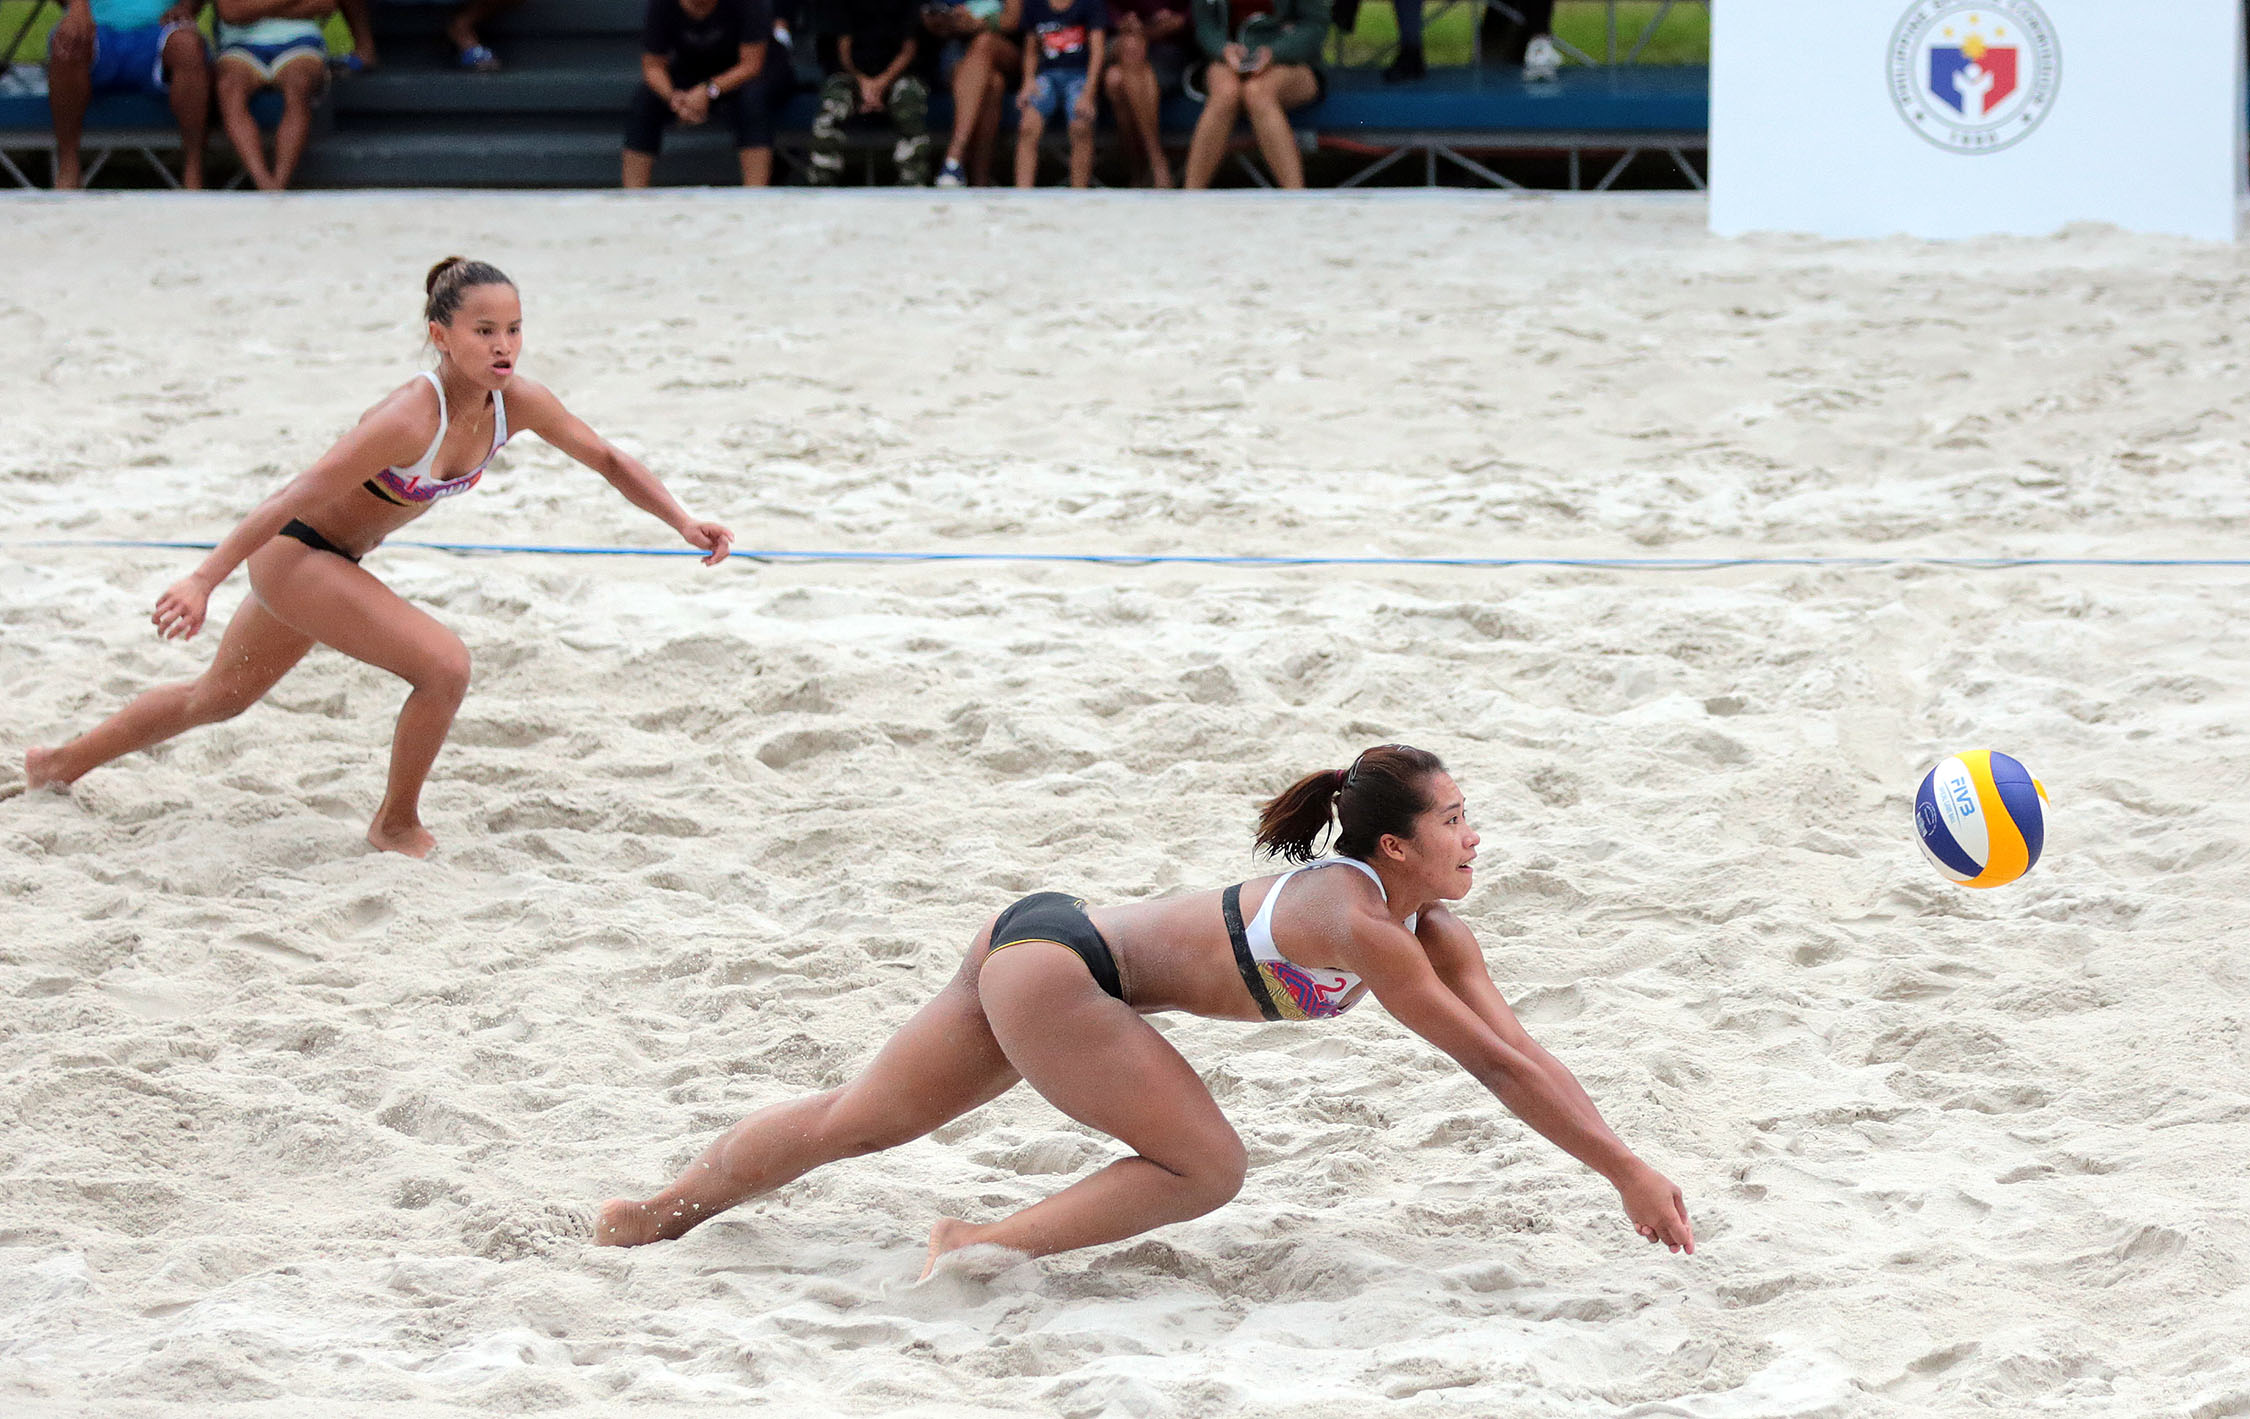 BEACH VOLLEYBALL / DECEMBER 3, 2019 Filipino volleybelles Cherry Ann Rondina and Bernadeth Pons holds their ground against Thailand's Varapatsorin Radarong and Khanttha Hongpak at the Beach Volleyball match in Subic Tennis Court in Subic, Zambales on the 3rd day of the 30th SEA Games on Tuesday, December 3, 2019. INQUIRER PHOTO / GRIG C. MONTEGRANDE